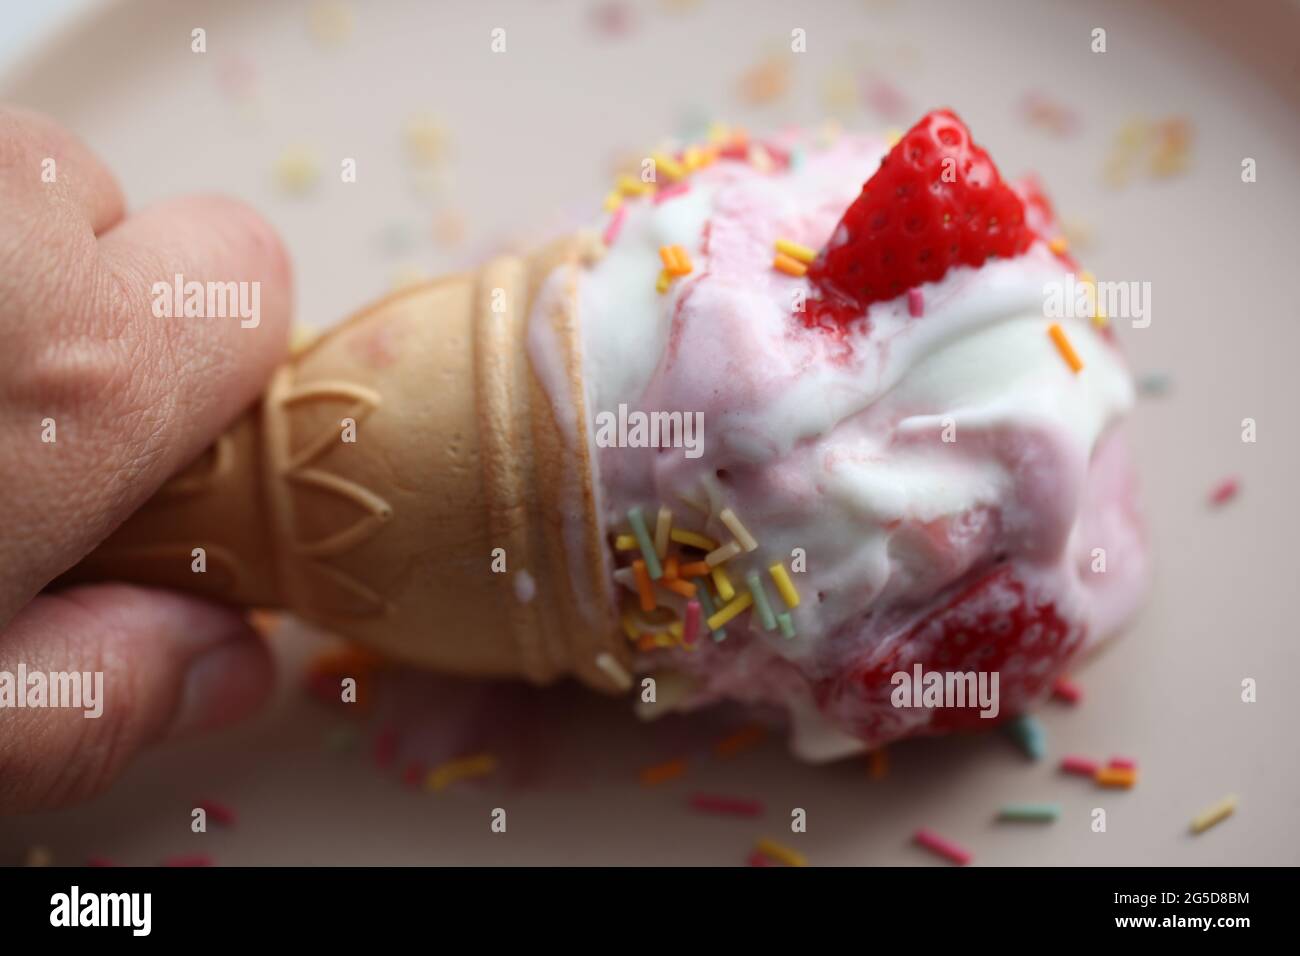 Close-up of a hand holding a Fresh Strawberry Ice-Cream Stock Photo